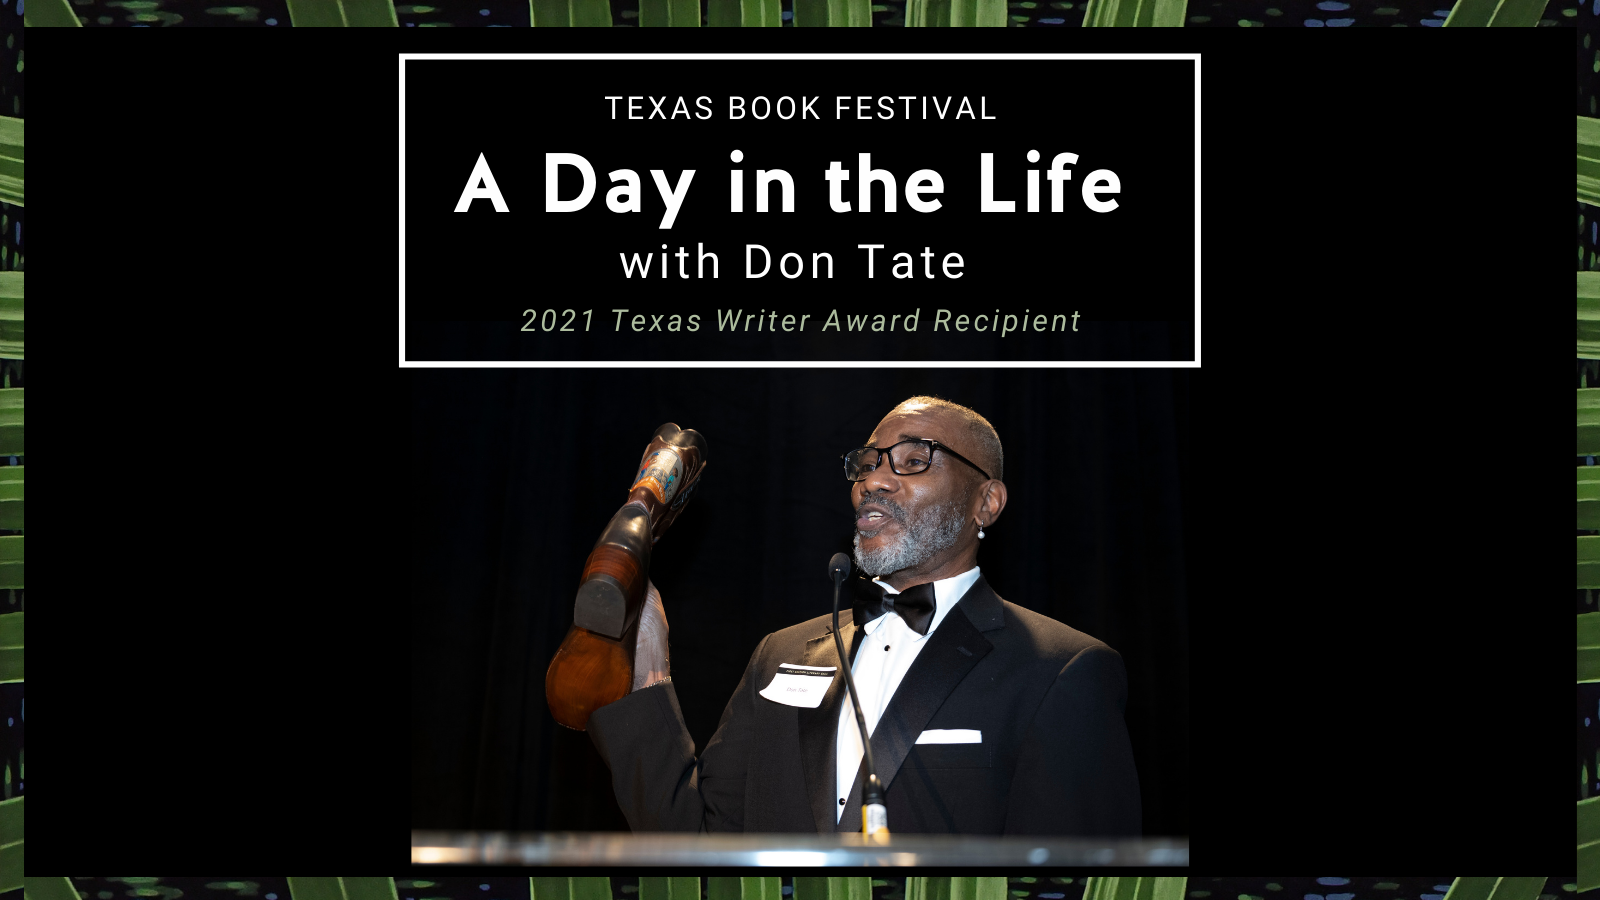 Journey to the Gala with Don Tate!